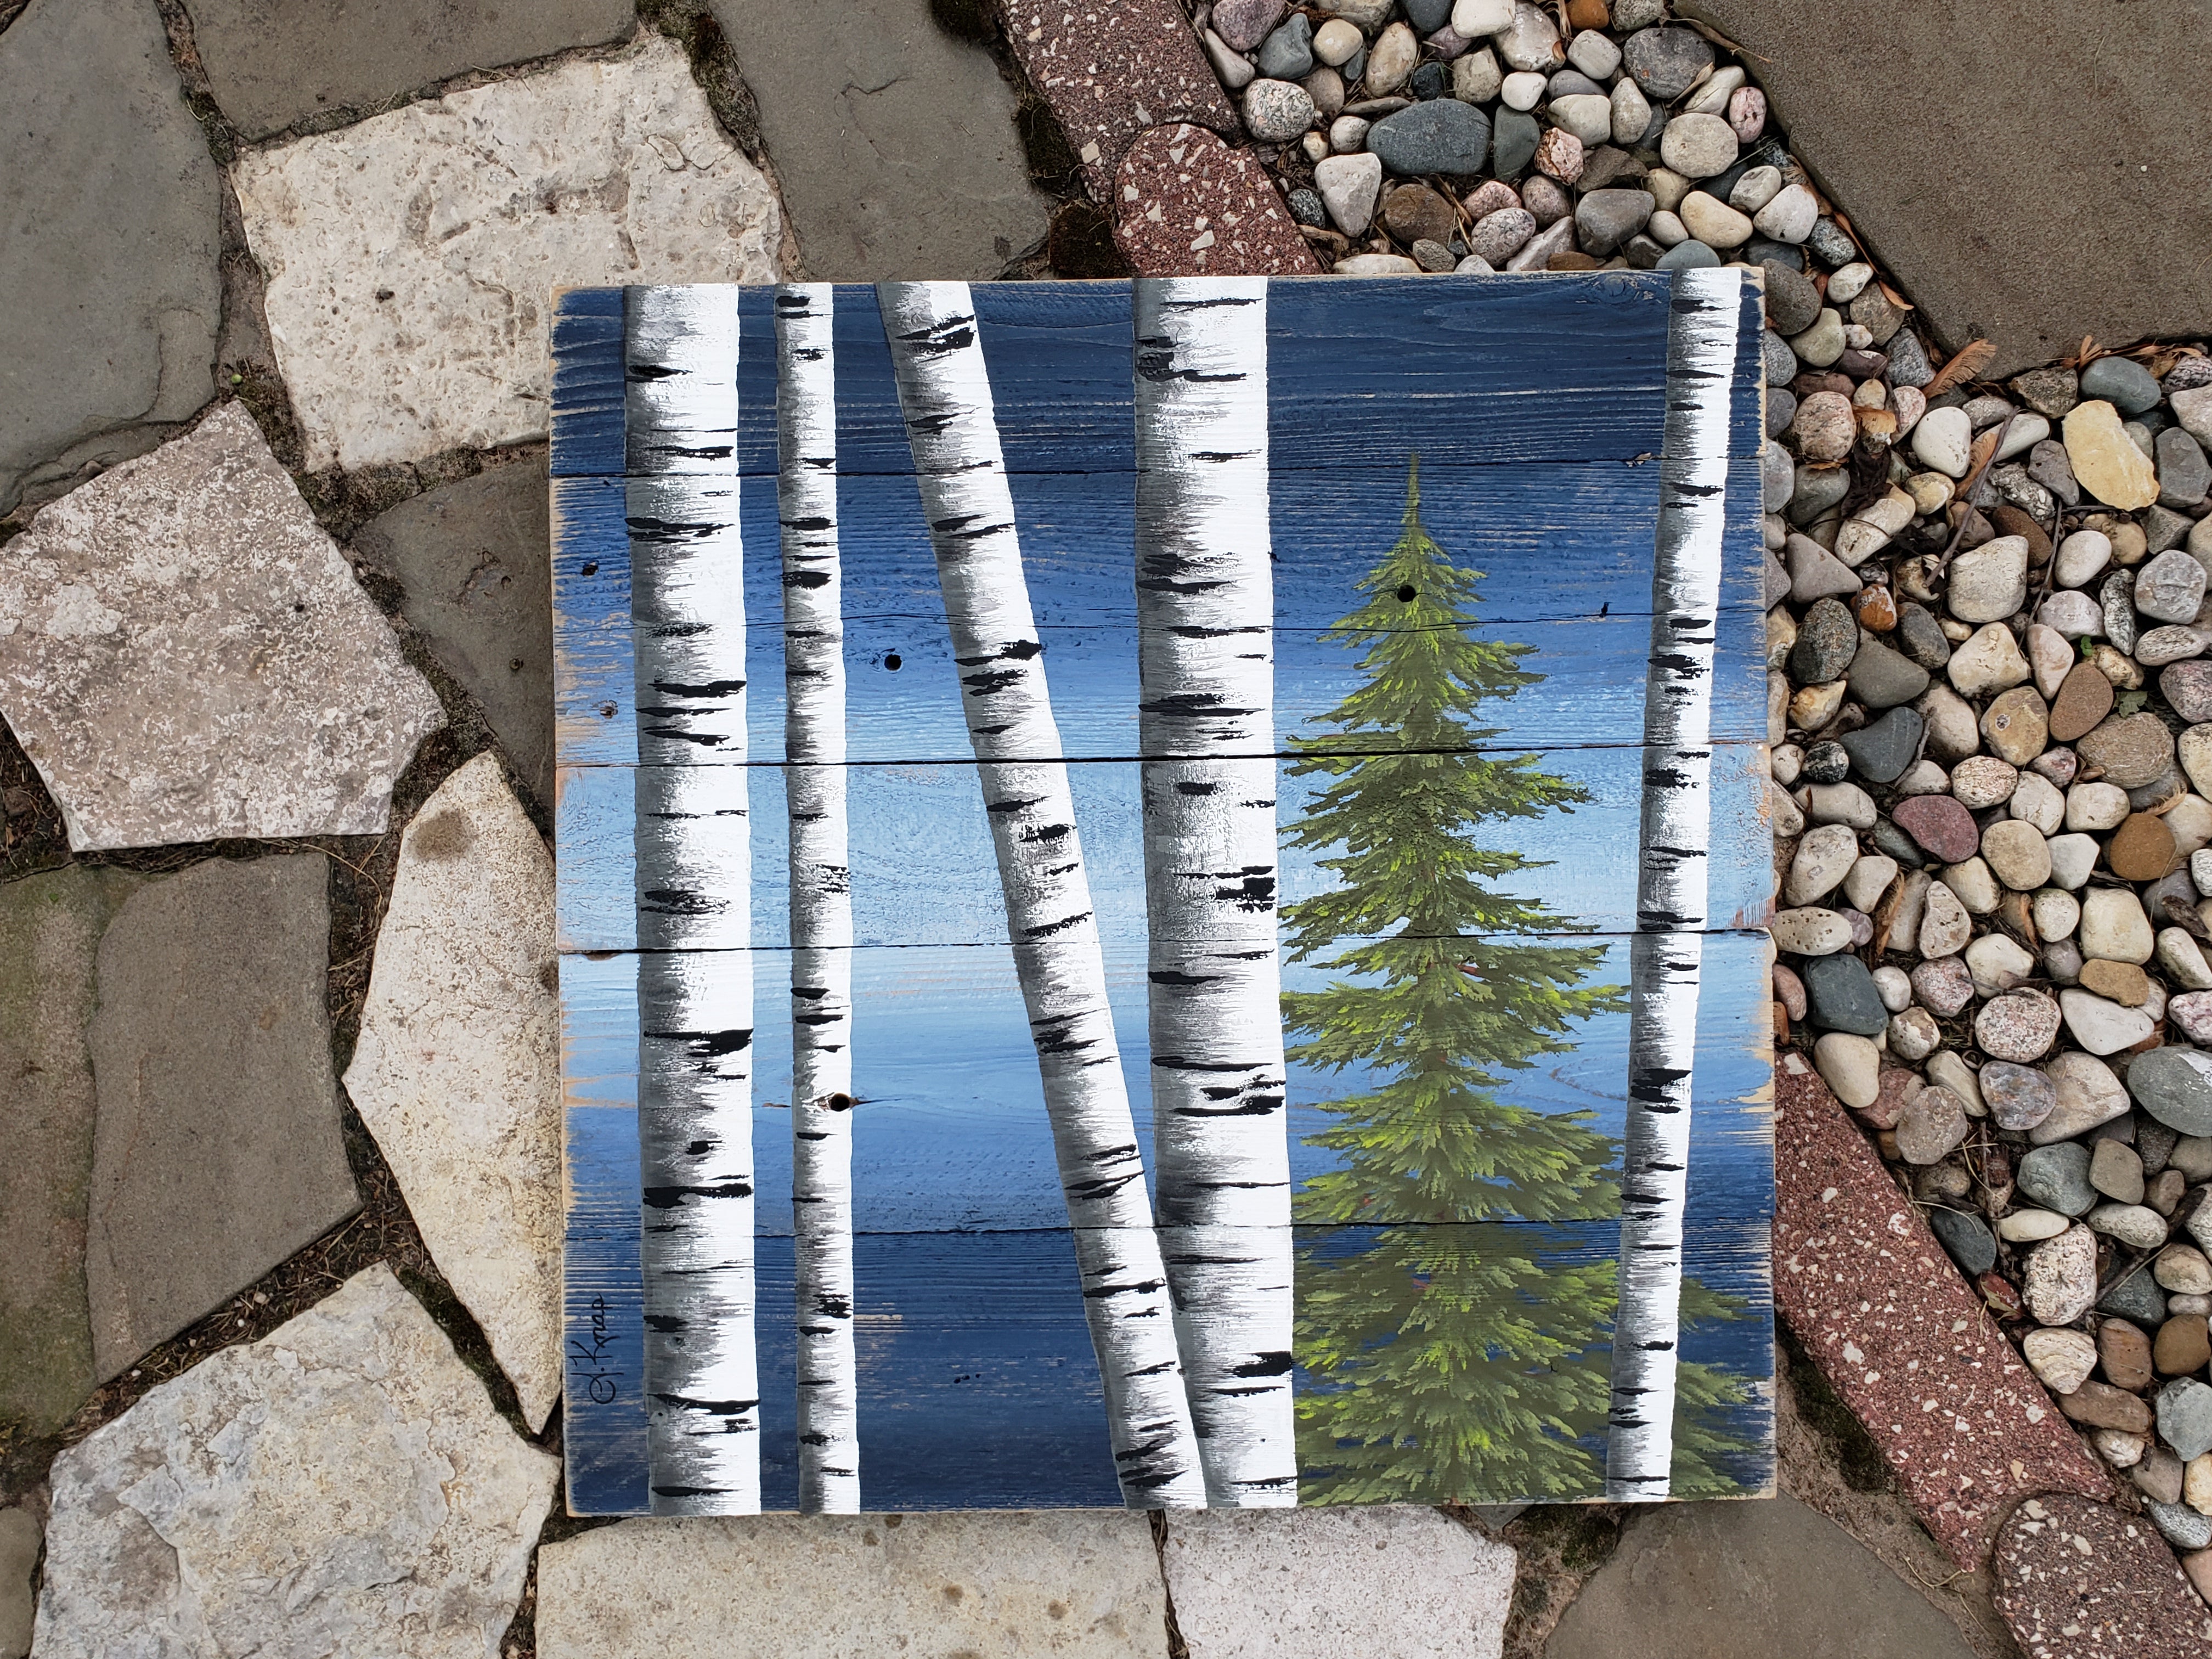 Sky blue white birch Painting with pine trees on Pallet wood, 2 Piece set, Hand Painted aspen trees, couch artwork